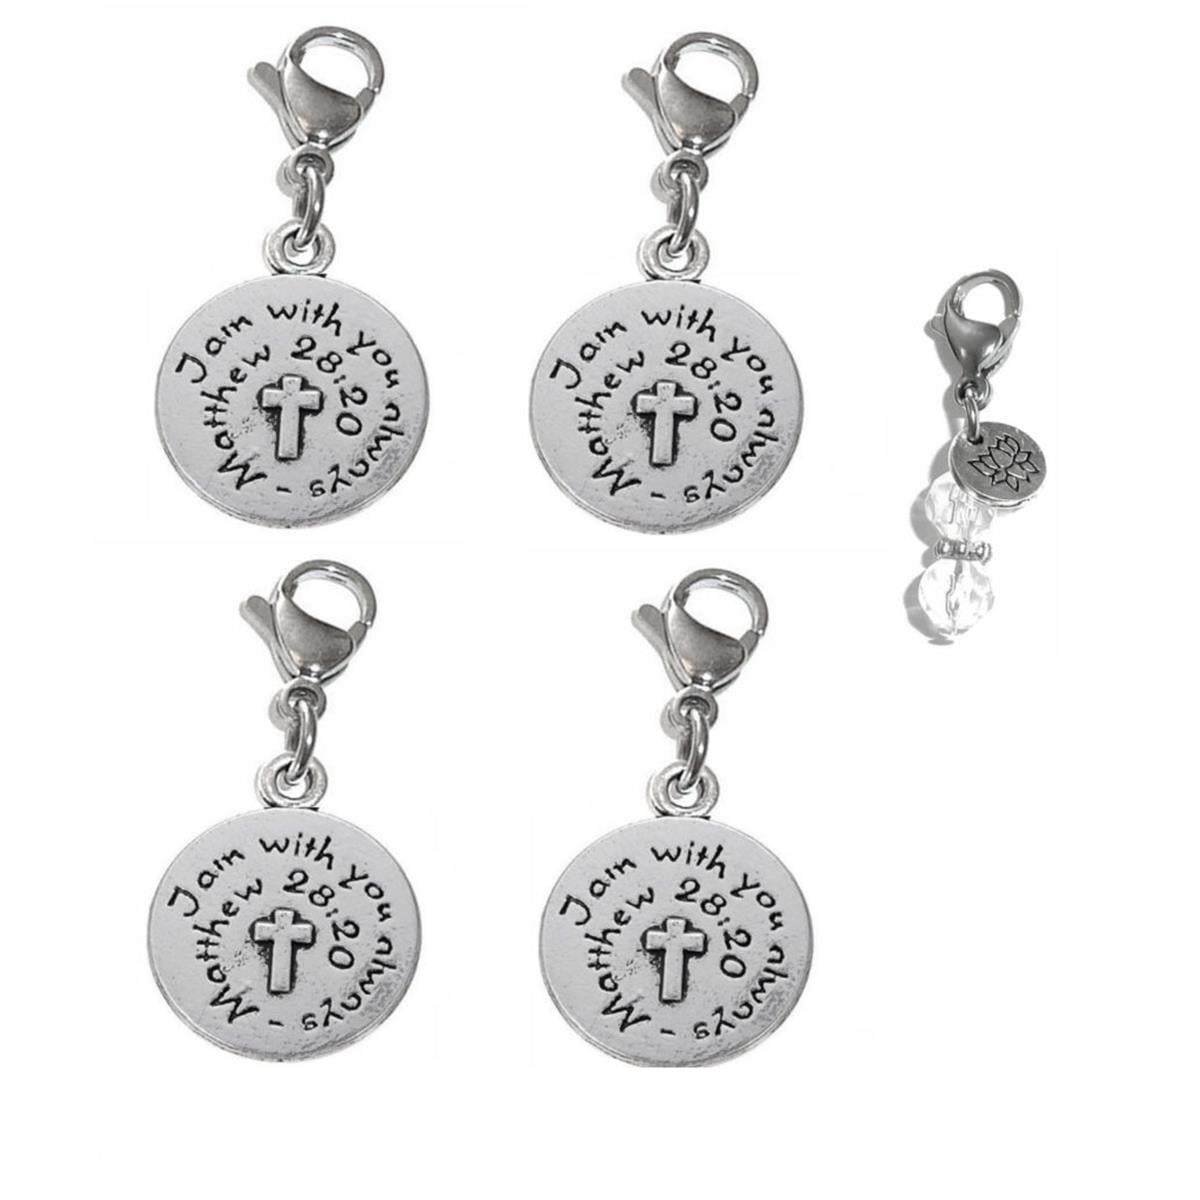 Chubby Chico Charms Delaware Pewter Charm on a Zipper Pull